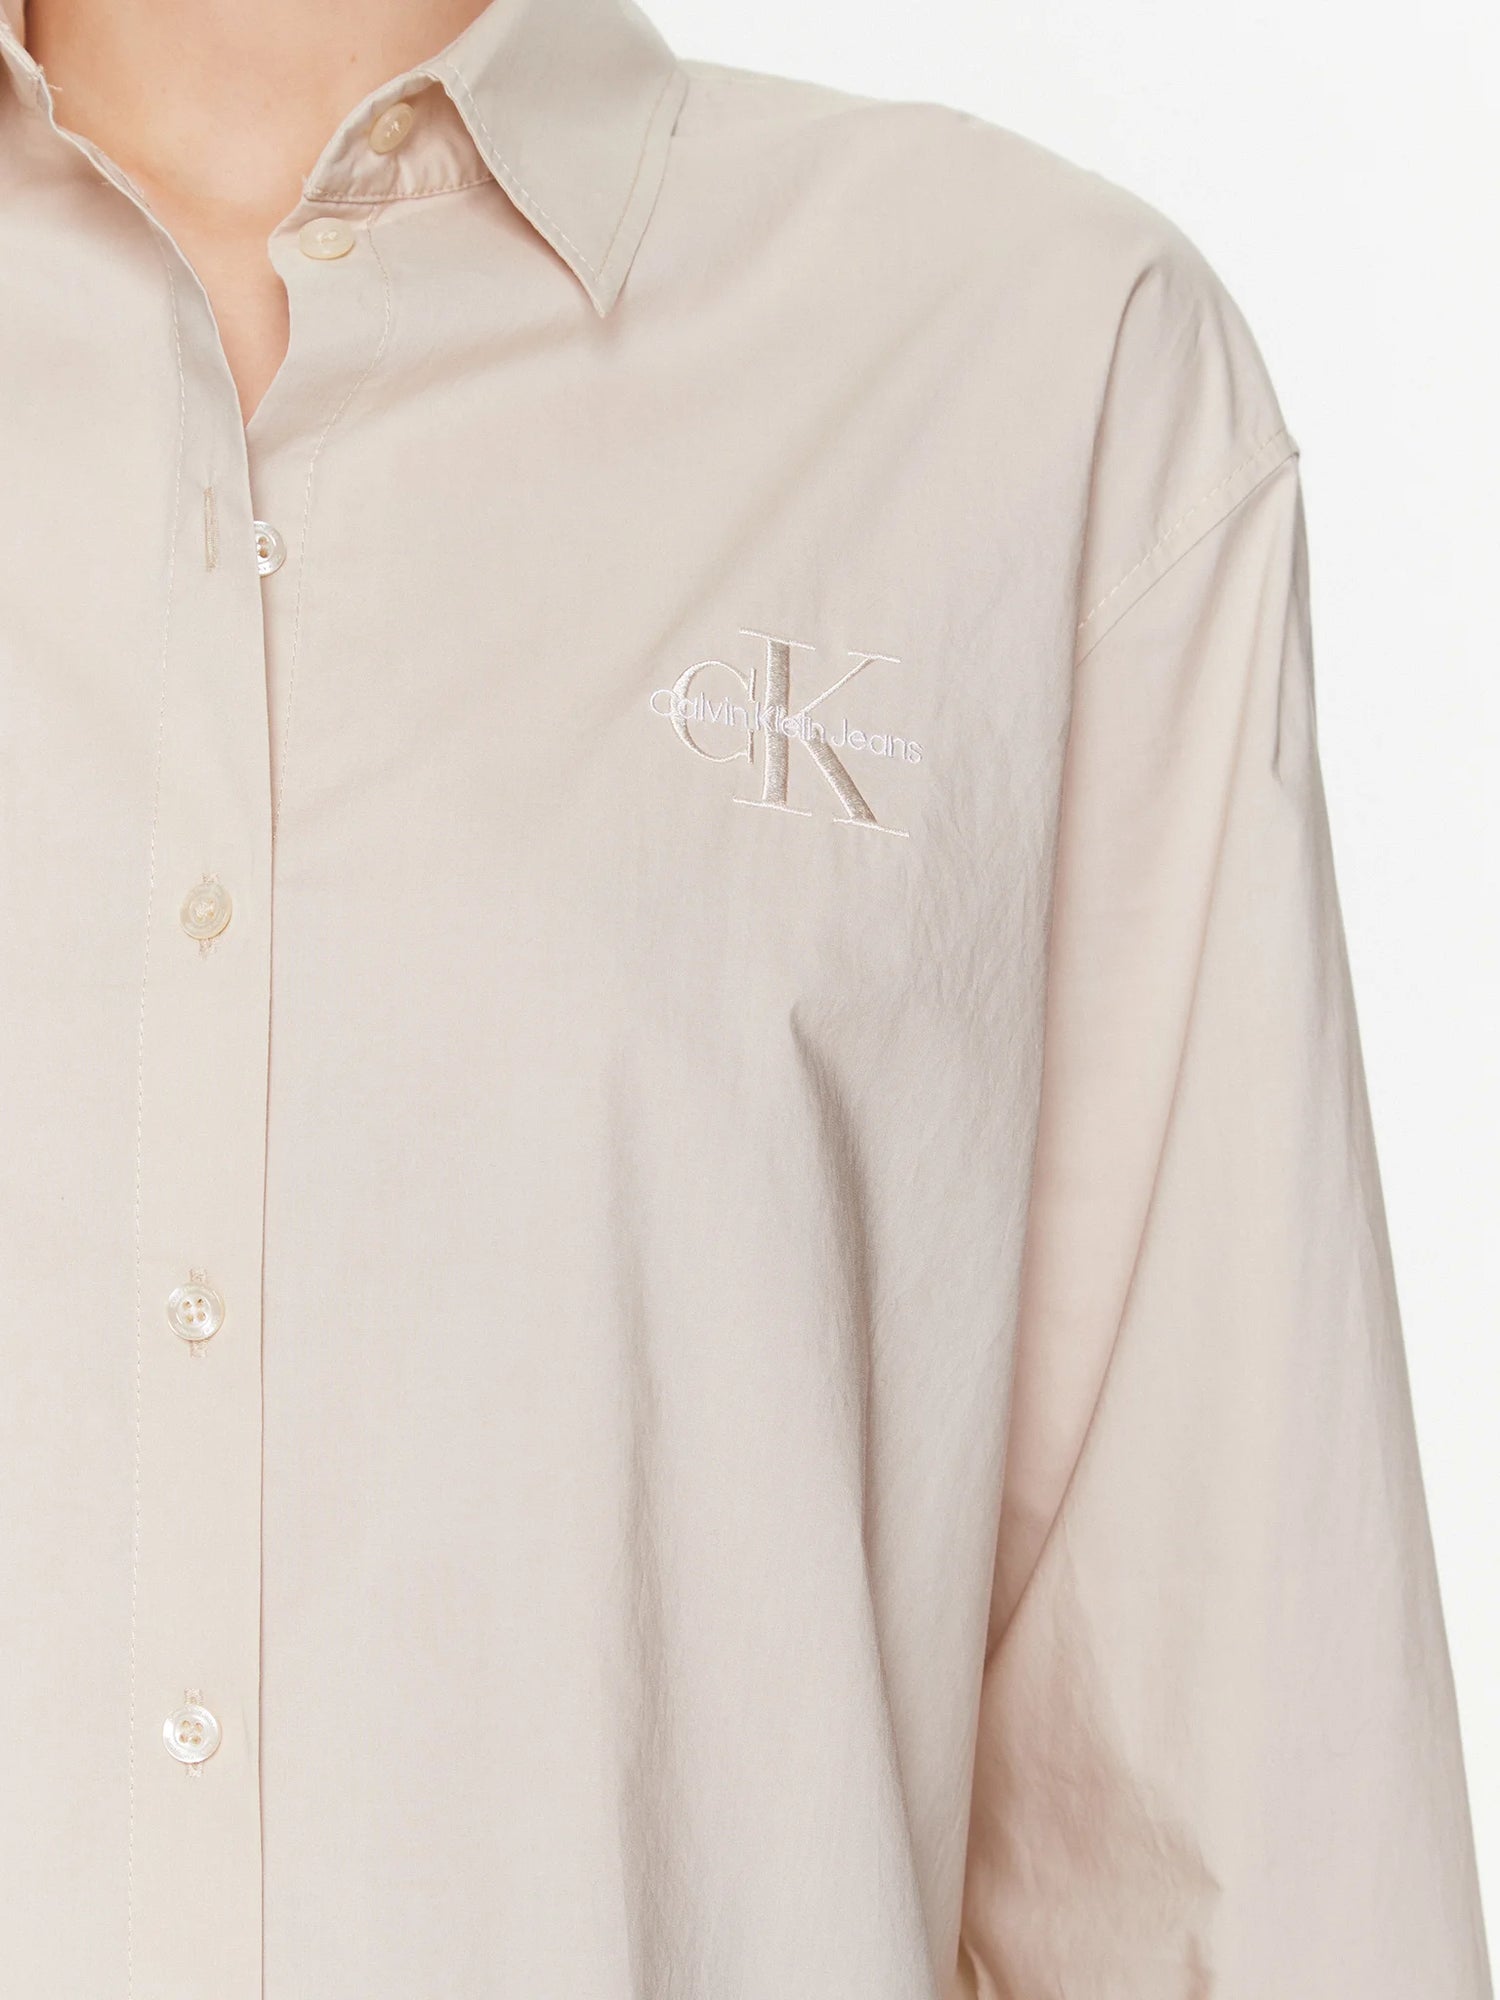 Monologo relaxed shirt - Classic Beige